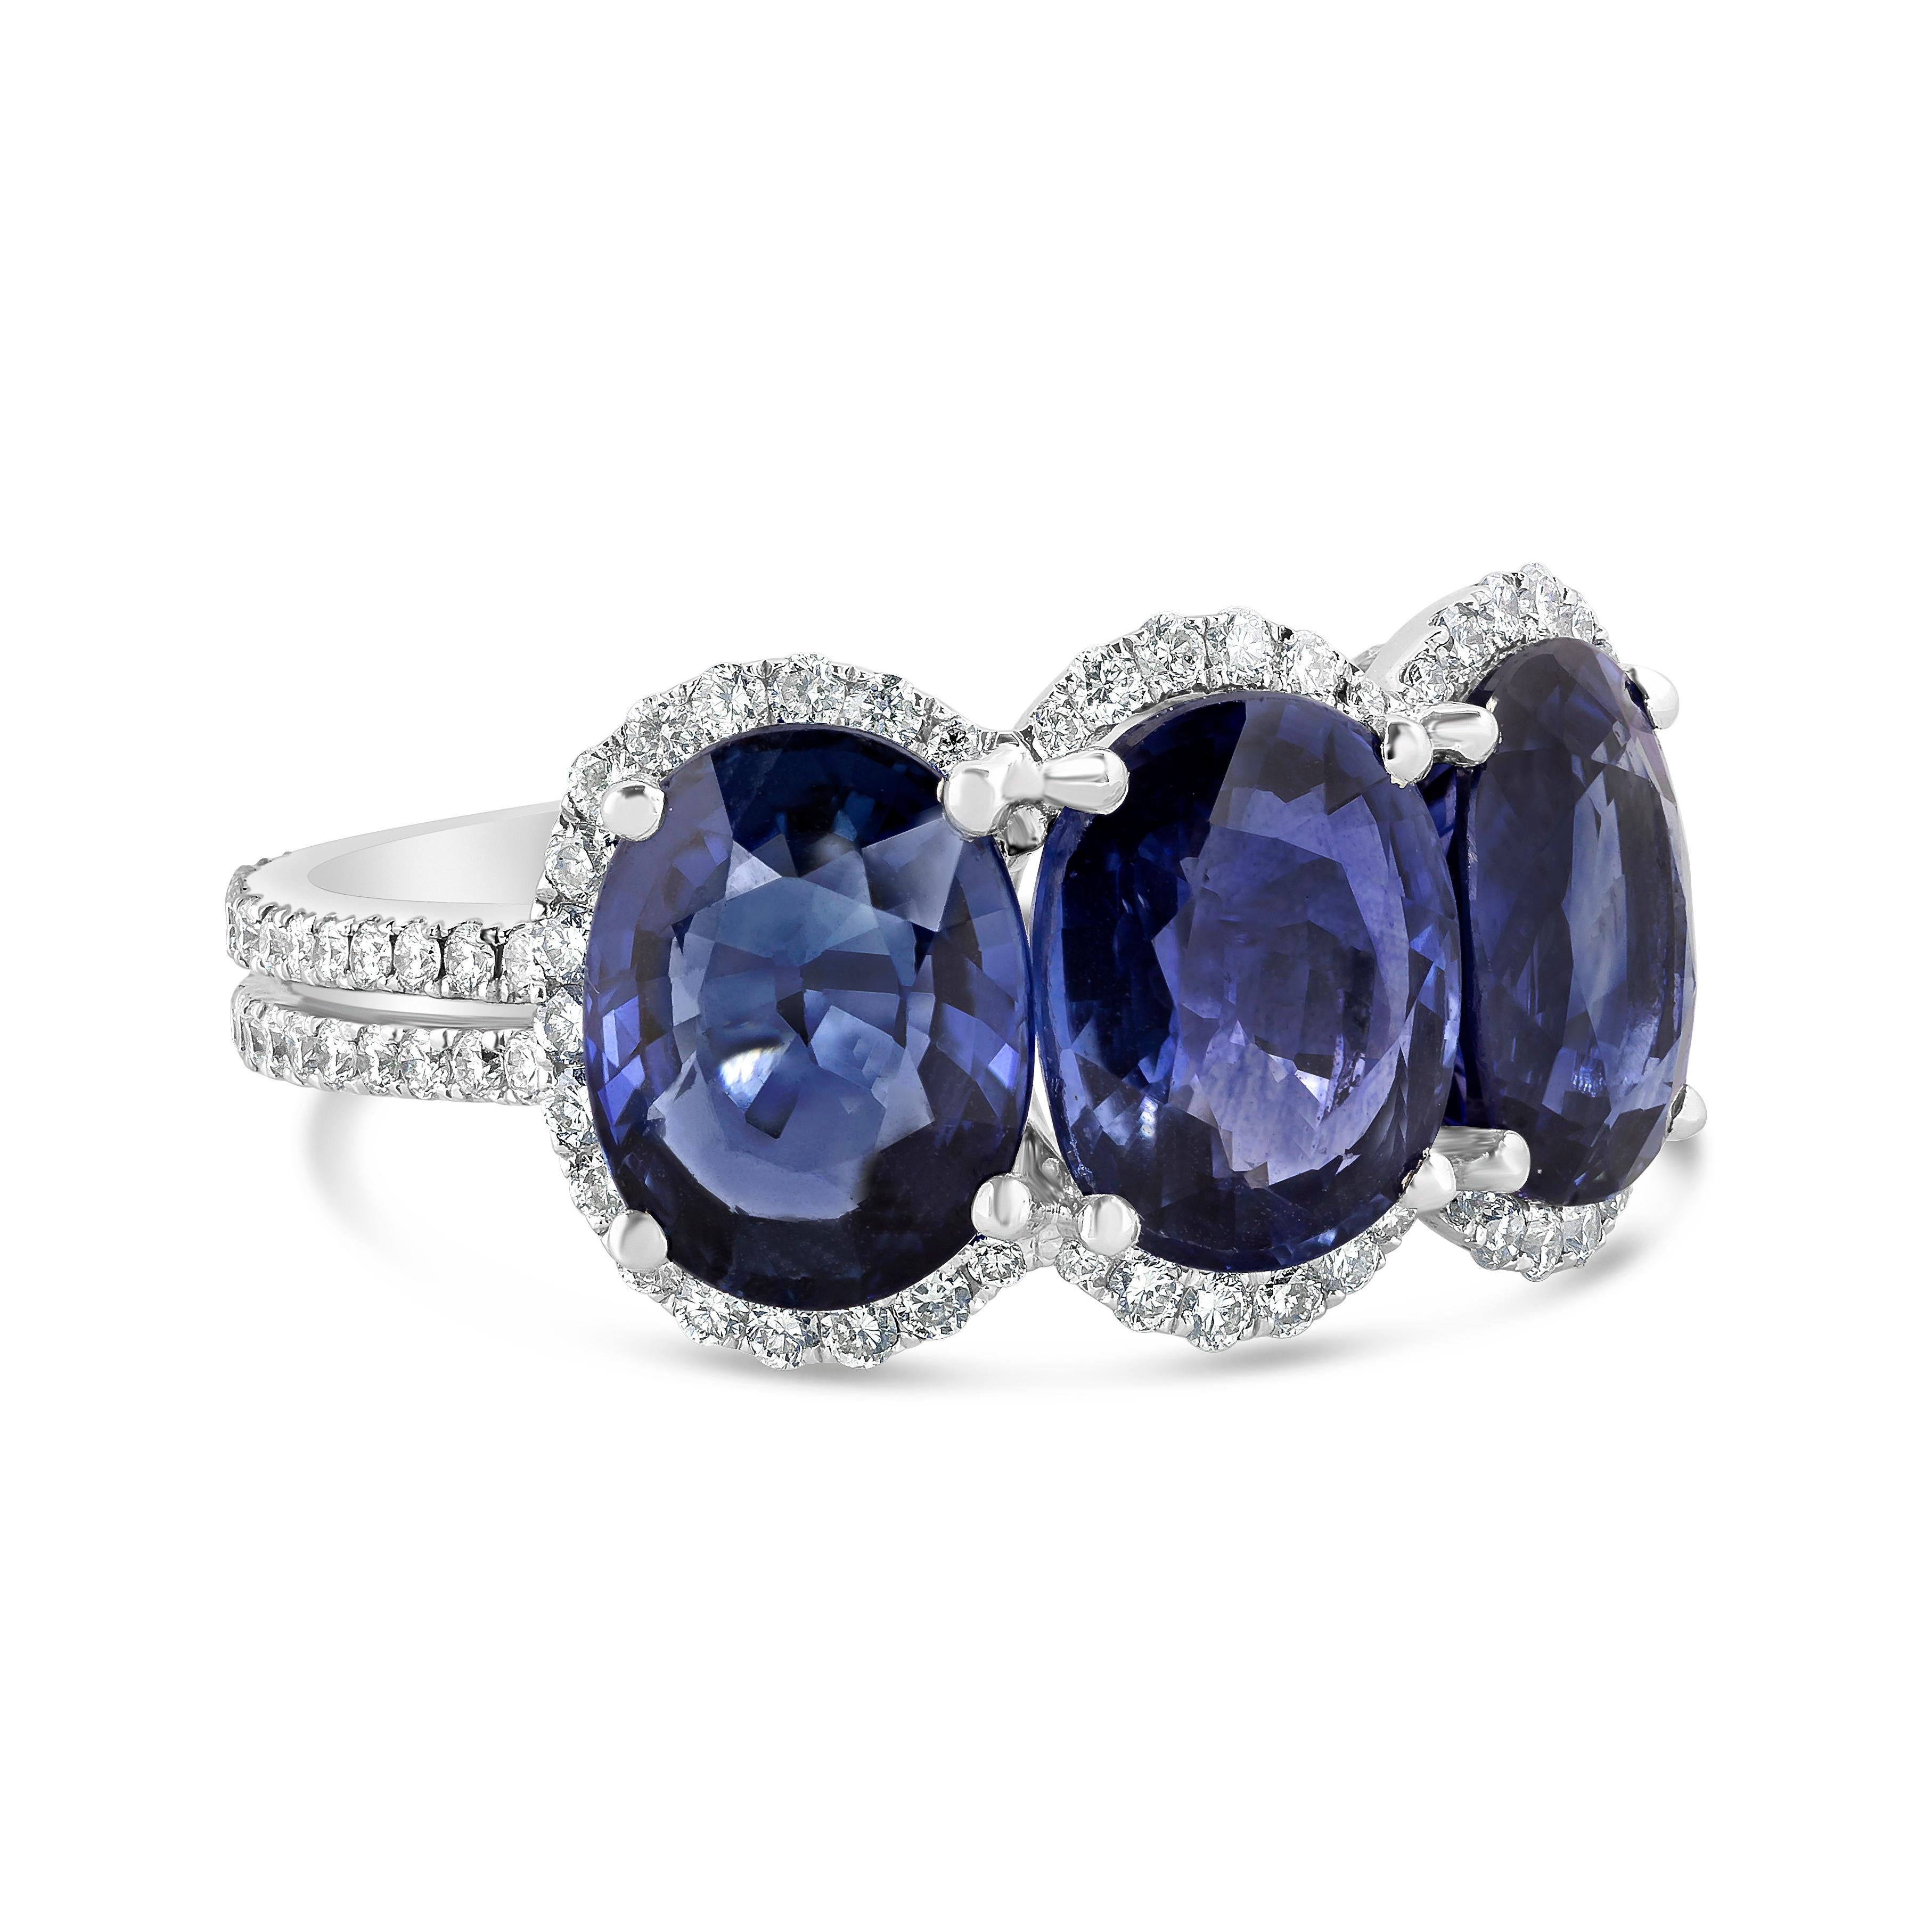 A cocktail ring that features three perfectly matched oval cut blue sapphires, weighing 6.07 carats total. Each stone is set in four prongs and surrounded by brilliant diamonds halo weighing 0.60 carats total. The ring has an accented split shank